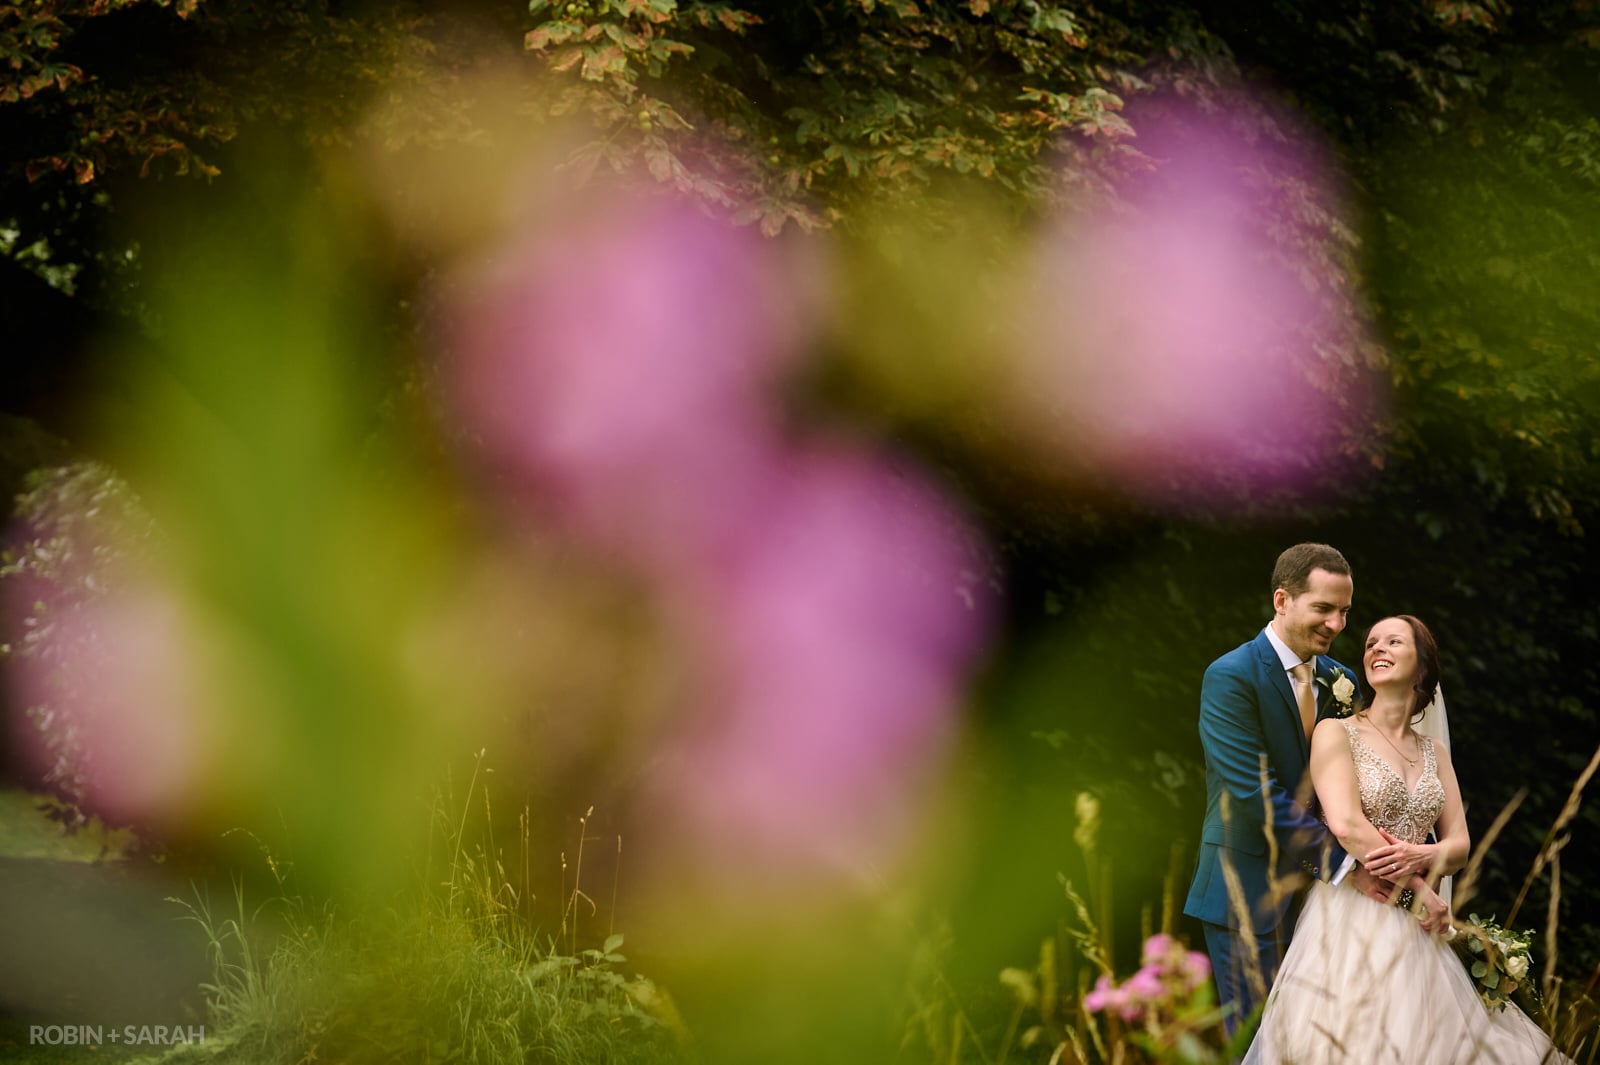 Bride and groom together in beautiful lush gardens